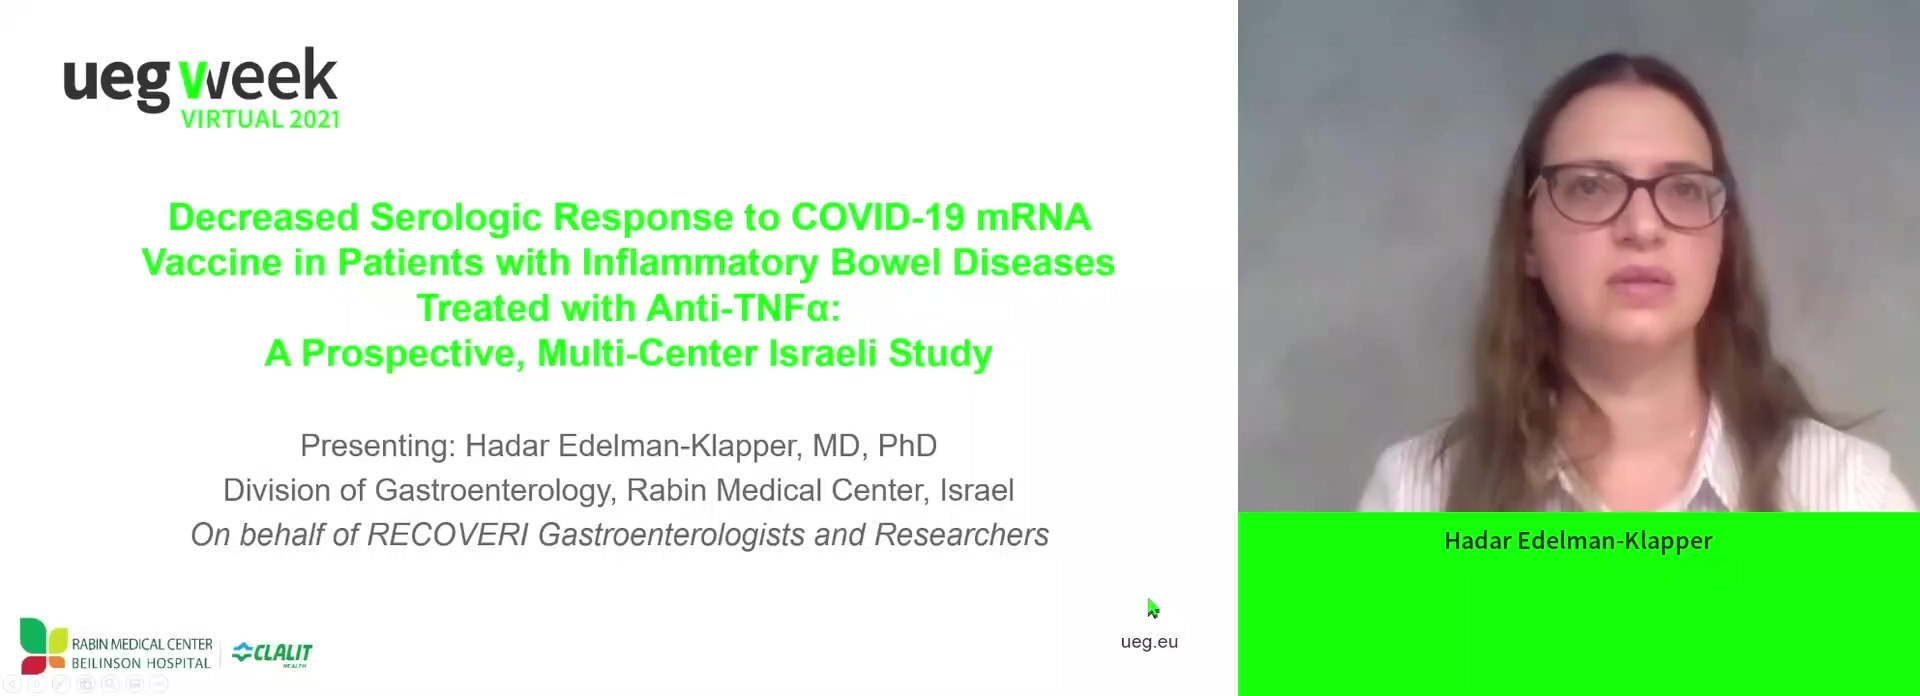 DECREASED IMMUNE RESPONSE TO COVID-19 MRNA VACCINE IN PATIENTS WITH INFLAMMATORY BOWEL DISEASES TREATED WITH ANTI TNF?: A PROSPECTIVE, CONTROLLED, MULTI-CENTER ISRAELI STUDY